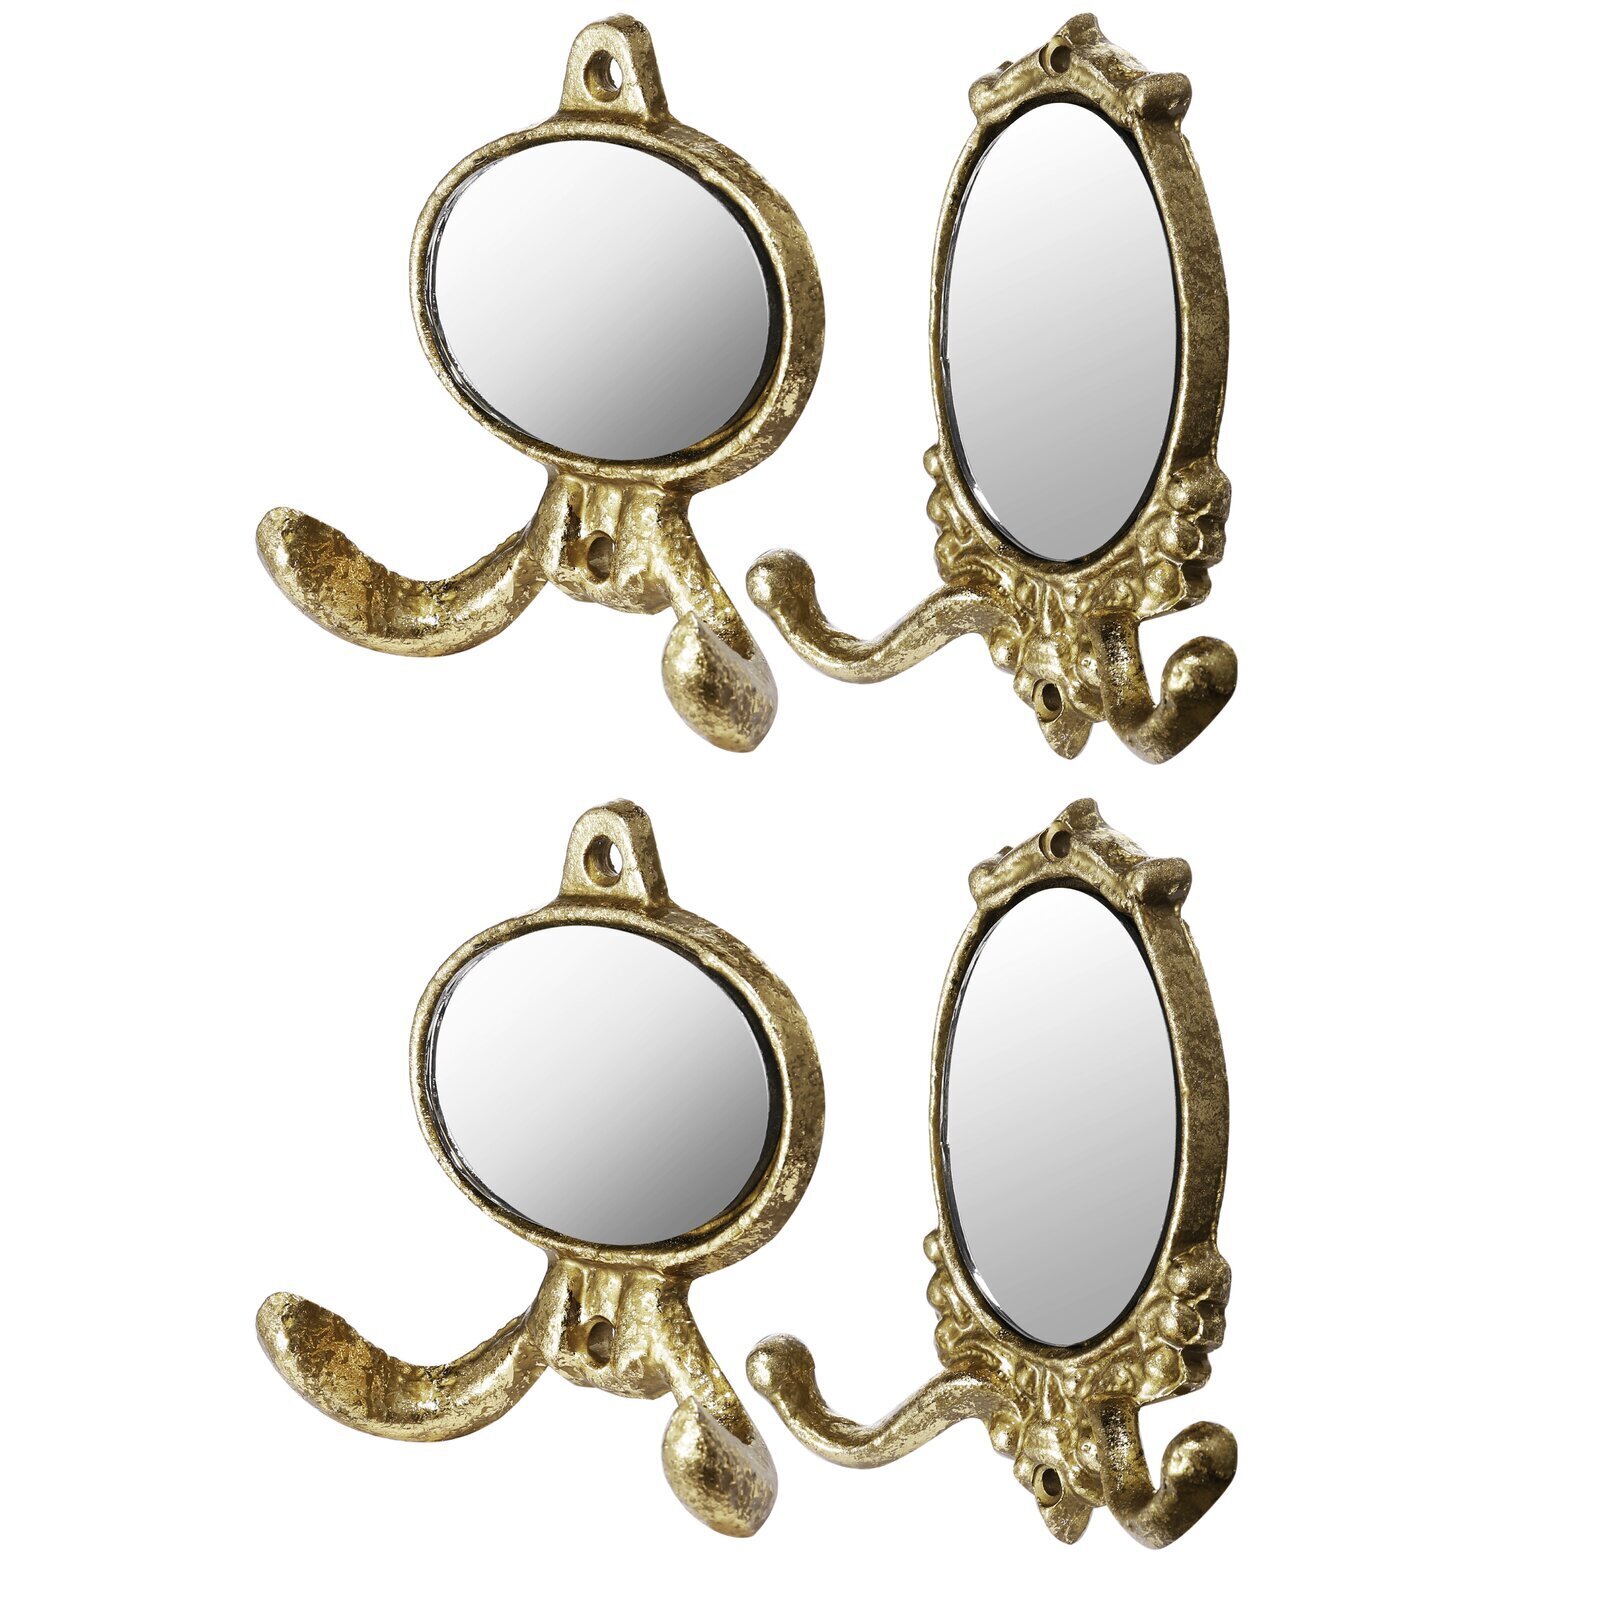 Individual Coat Hooks With Mirror